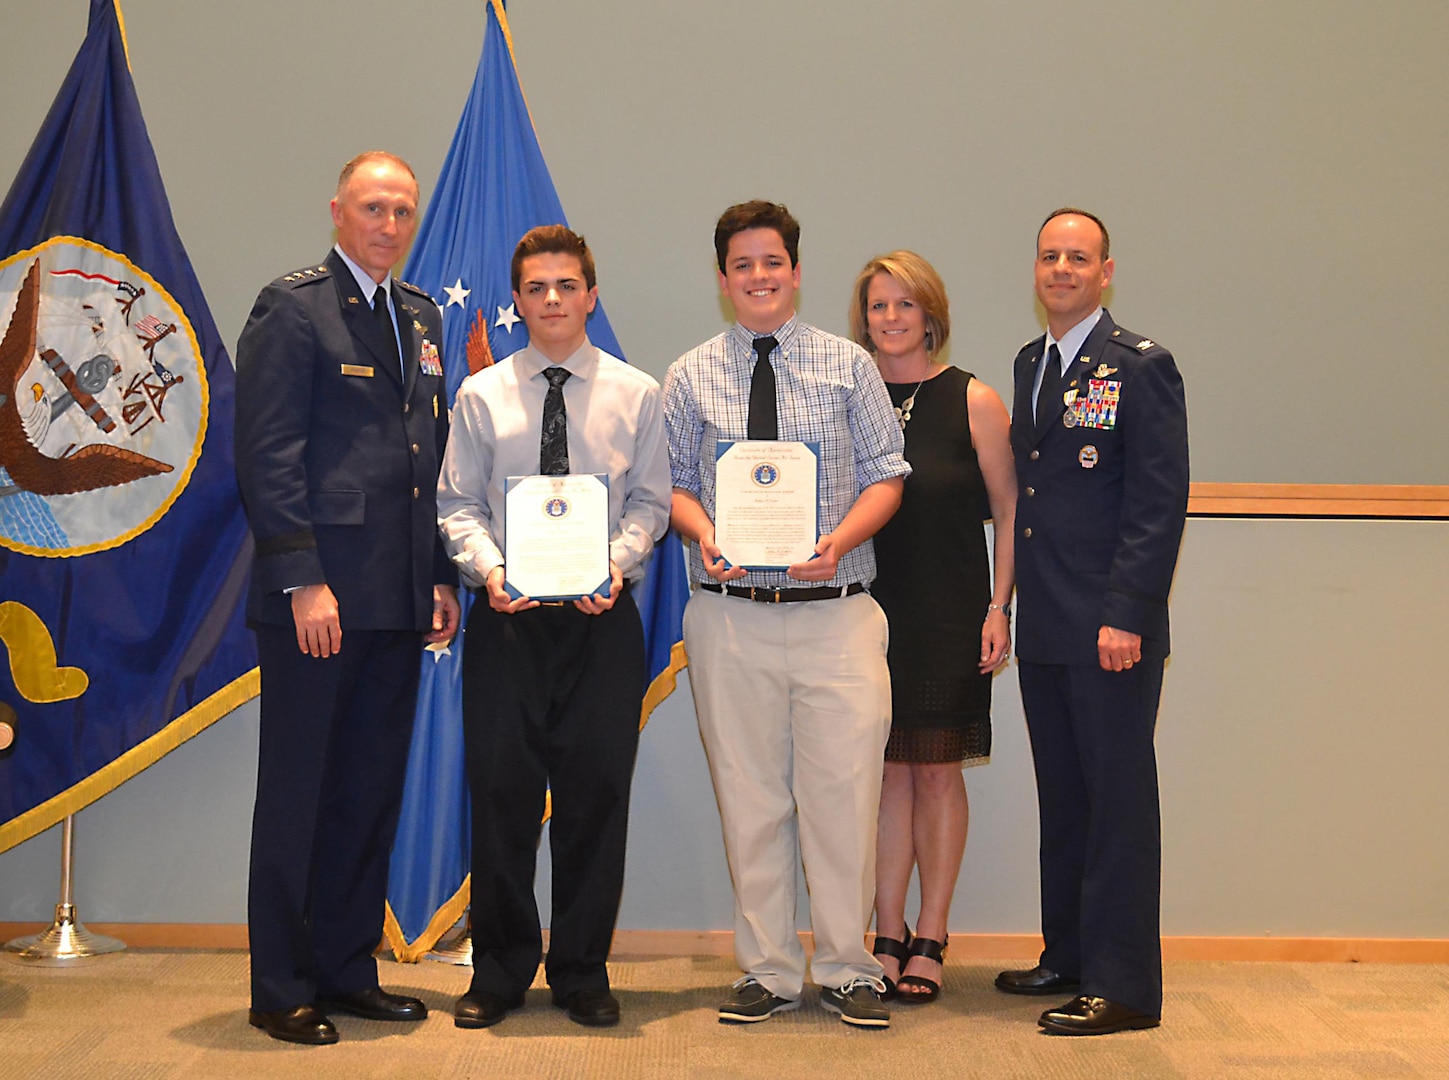 During a retirement ceremony for Air Force Col. Patrick Owens (far right), DLA Troop Support Clothing and Textiles director, Air Force Lt. Gen. William J. Bender, Office of the Secretary of the Air Force chief of information dominance and chief information officer (left) presents Owens’ two sons with letters of appreciation. Owens’ wife is also pictured. Owens retired after a 30-year career and two years as the C&T director.